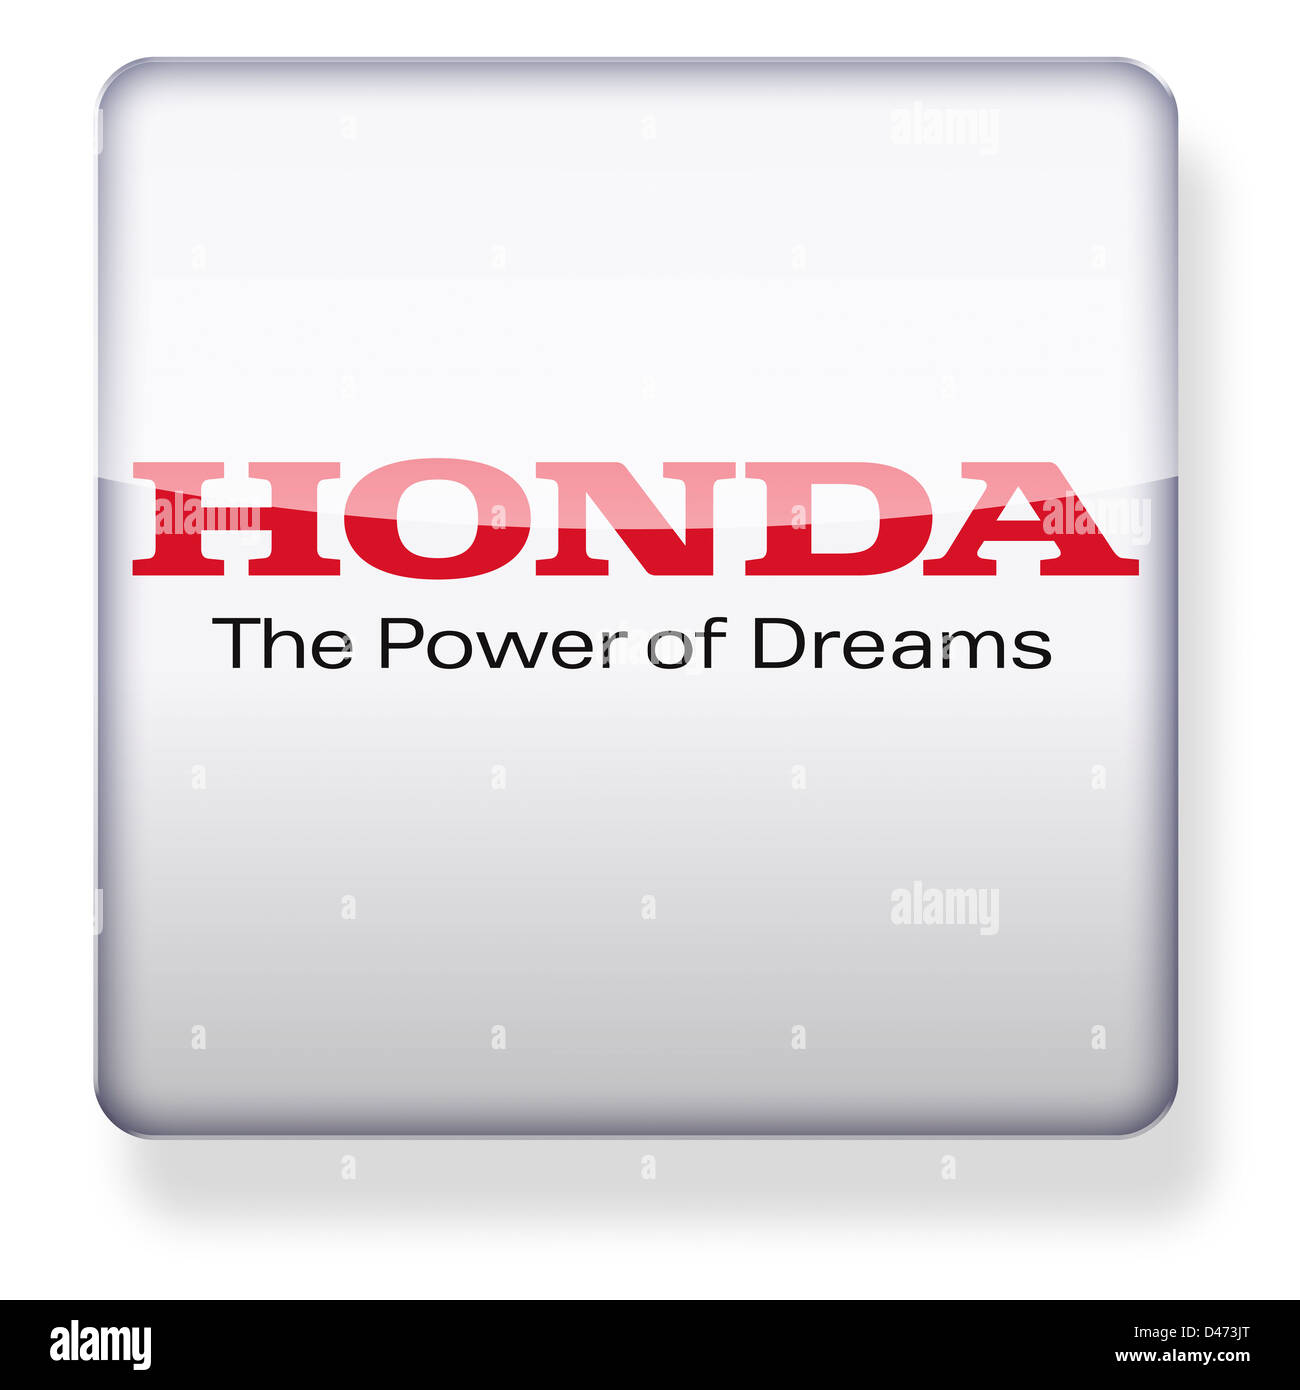 Honda logo as an app icon. Clipping path included. Stock Photo